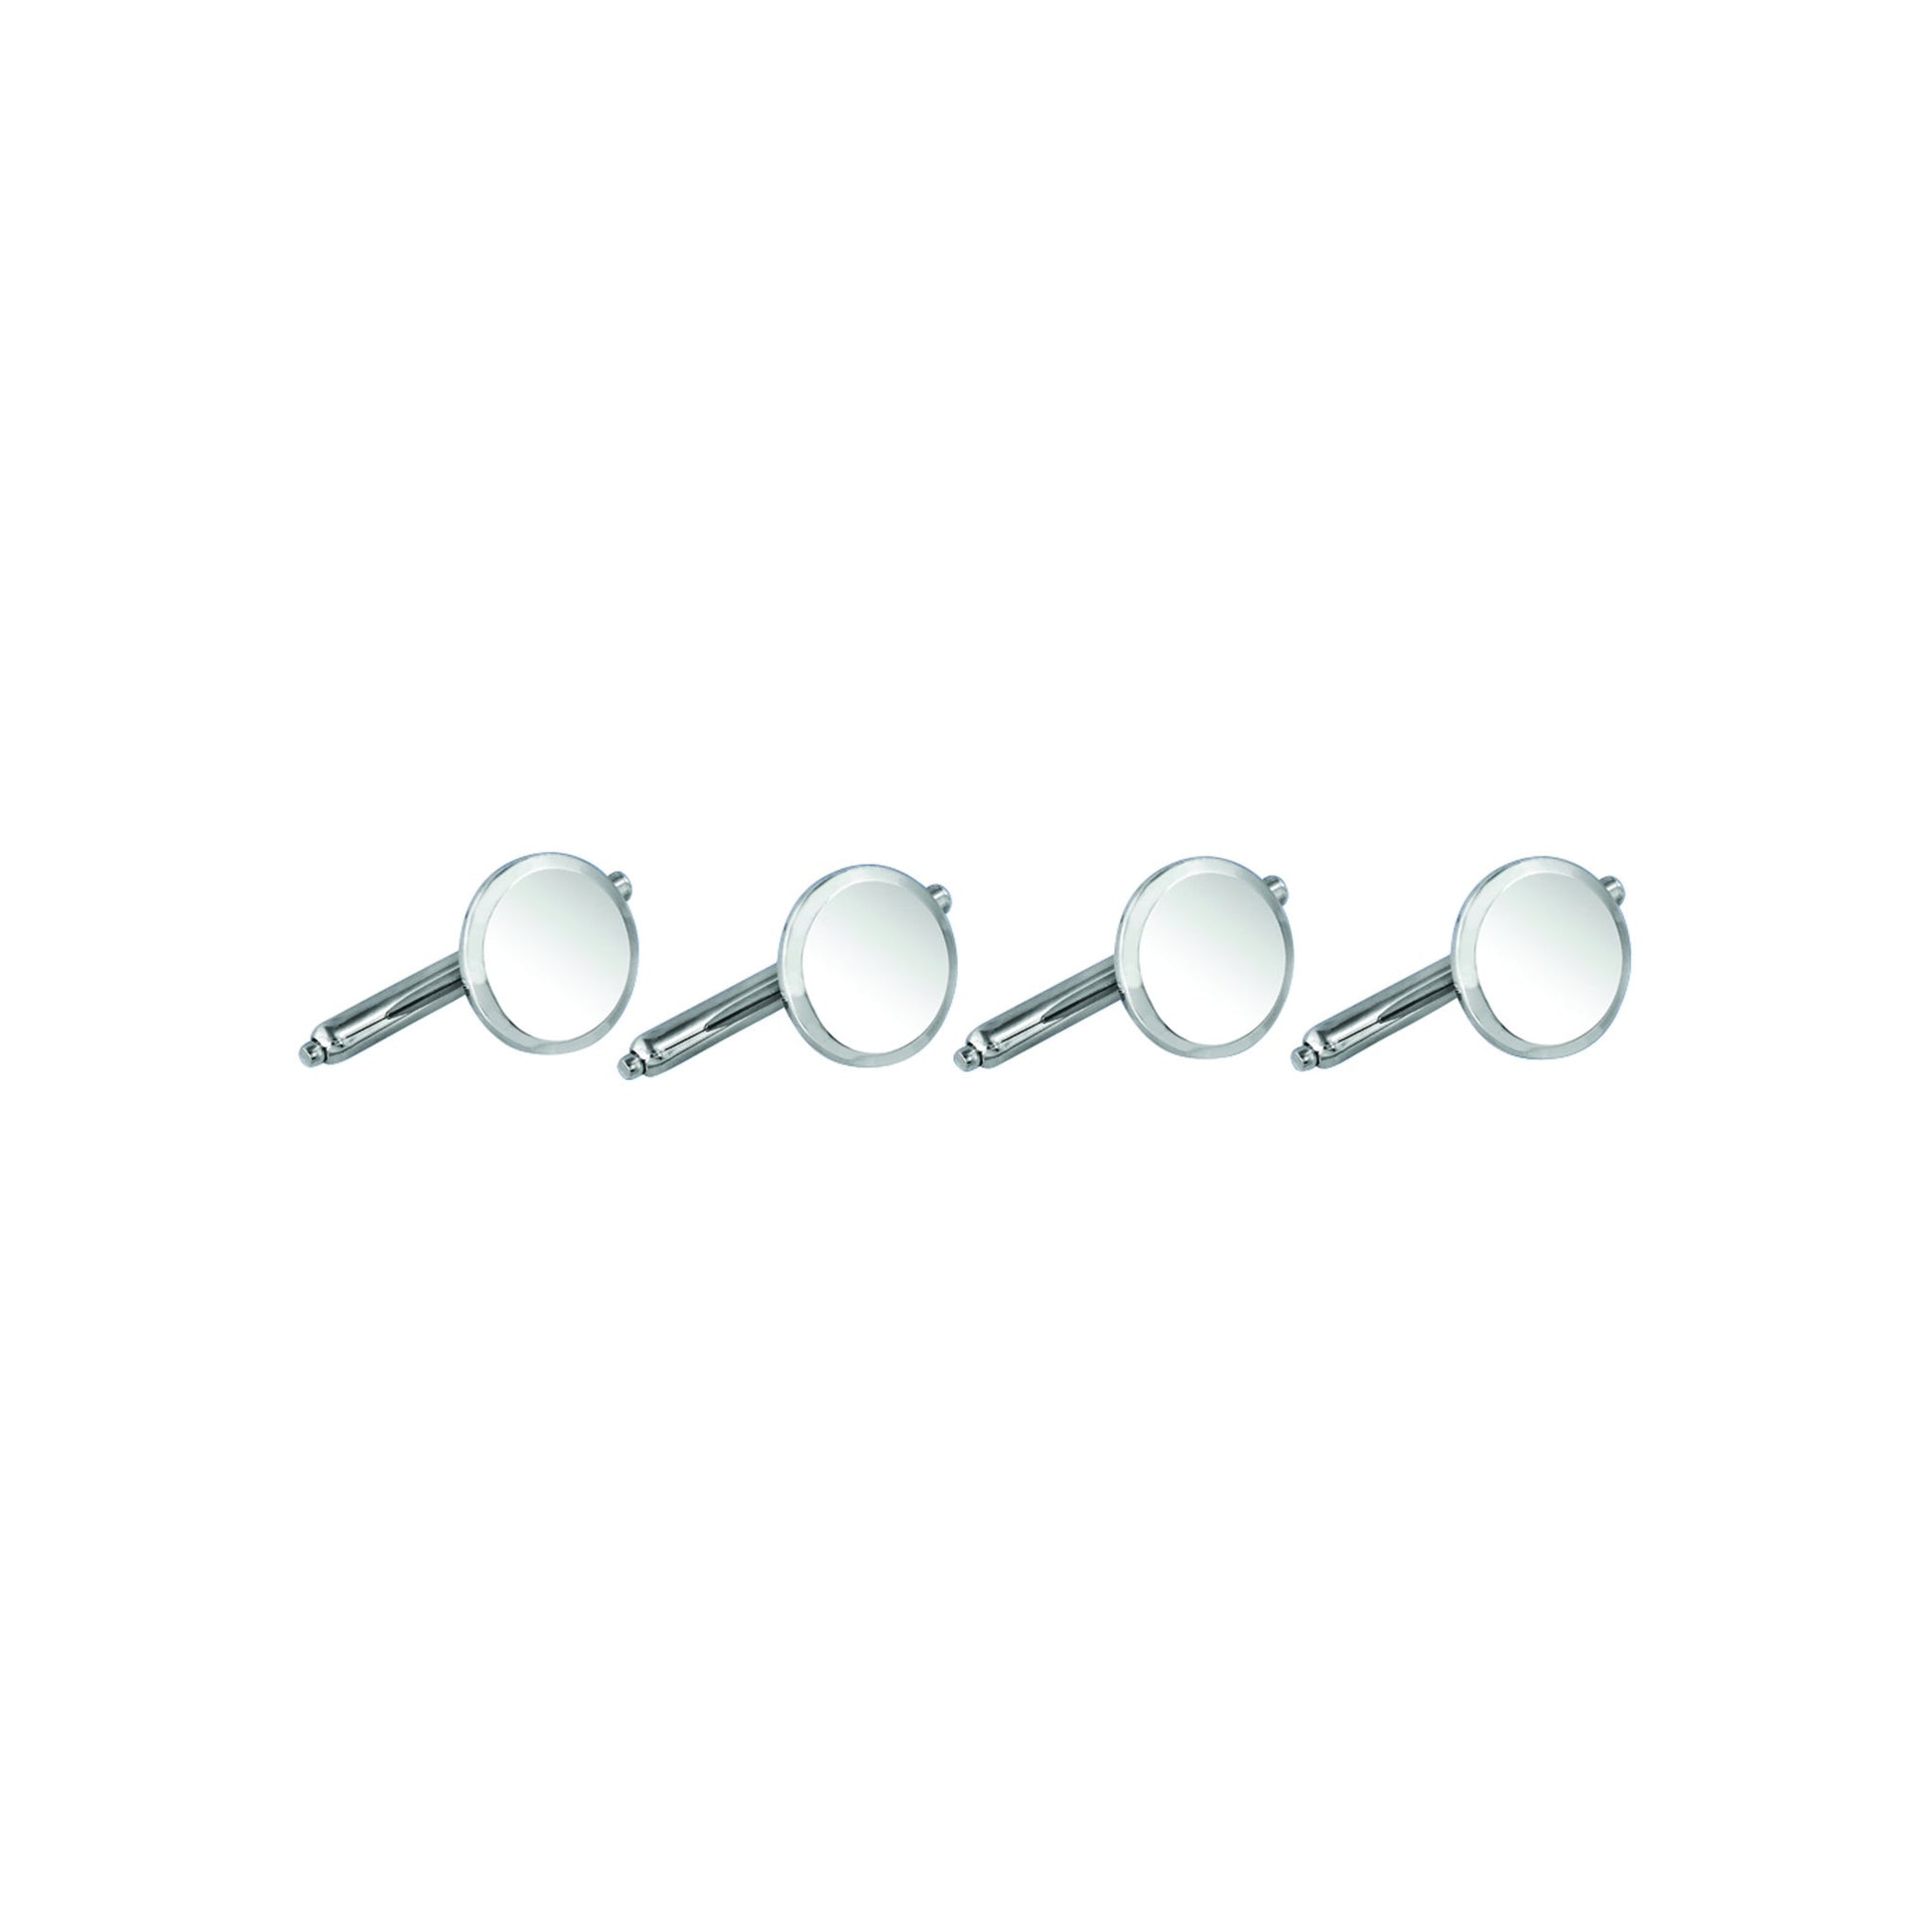 A four piece s sterling silver polished stud set with bevel edge displayed on a neutral white background.